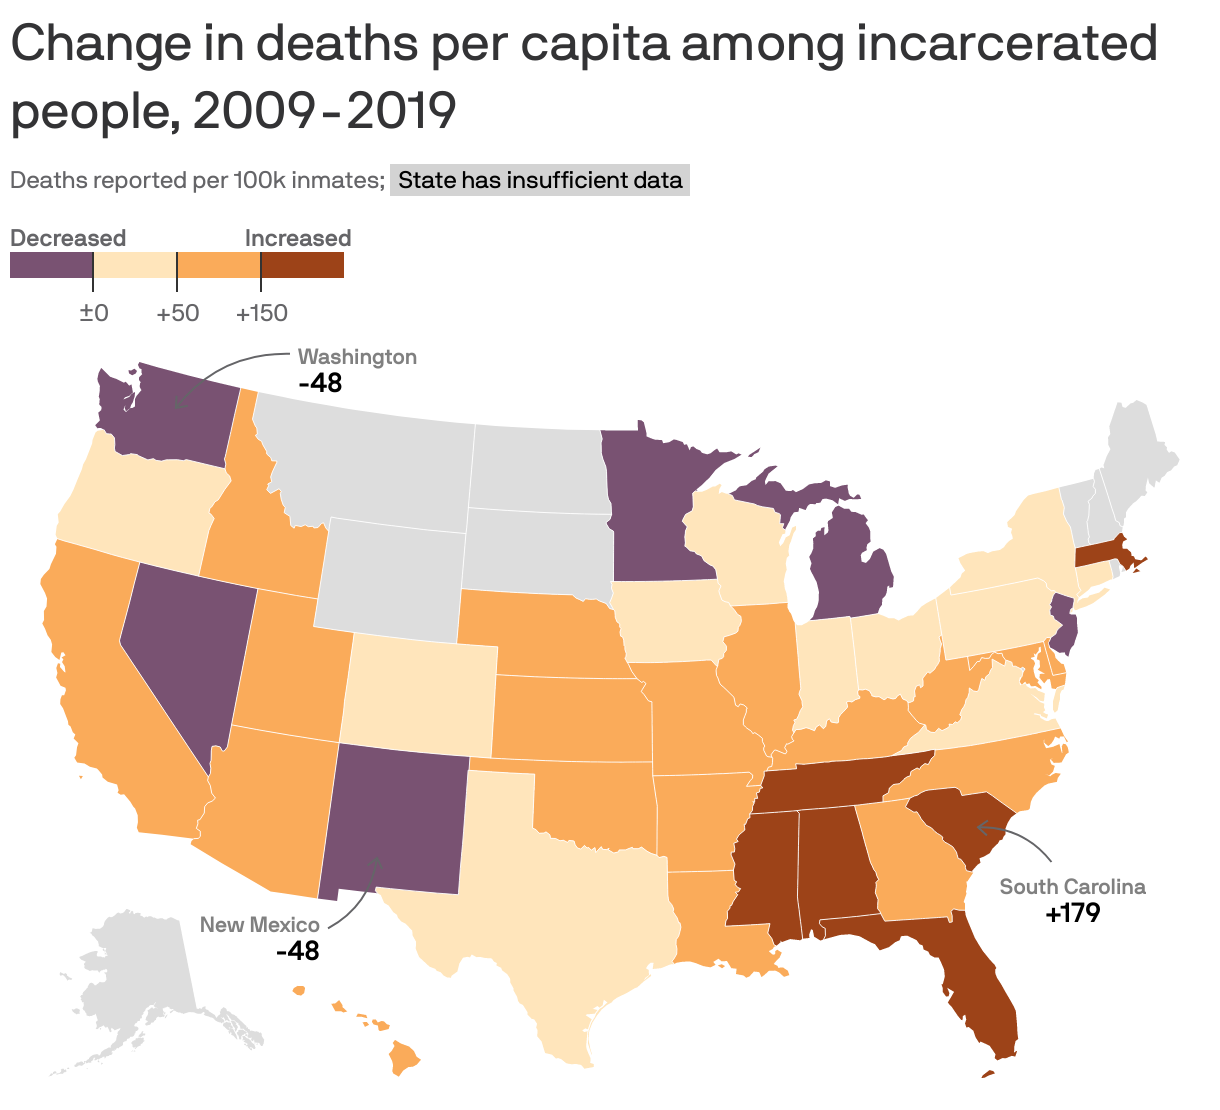 Change in deaths per capita among incarcerated people, 2009-2019